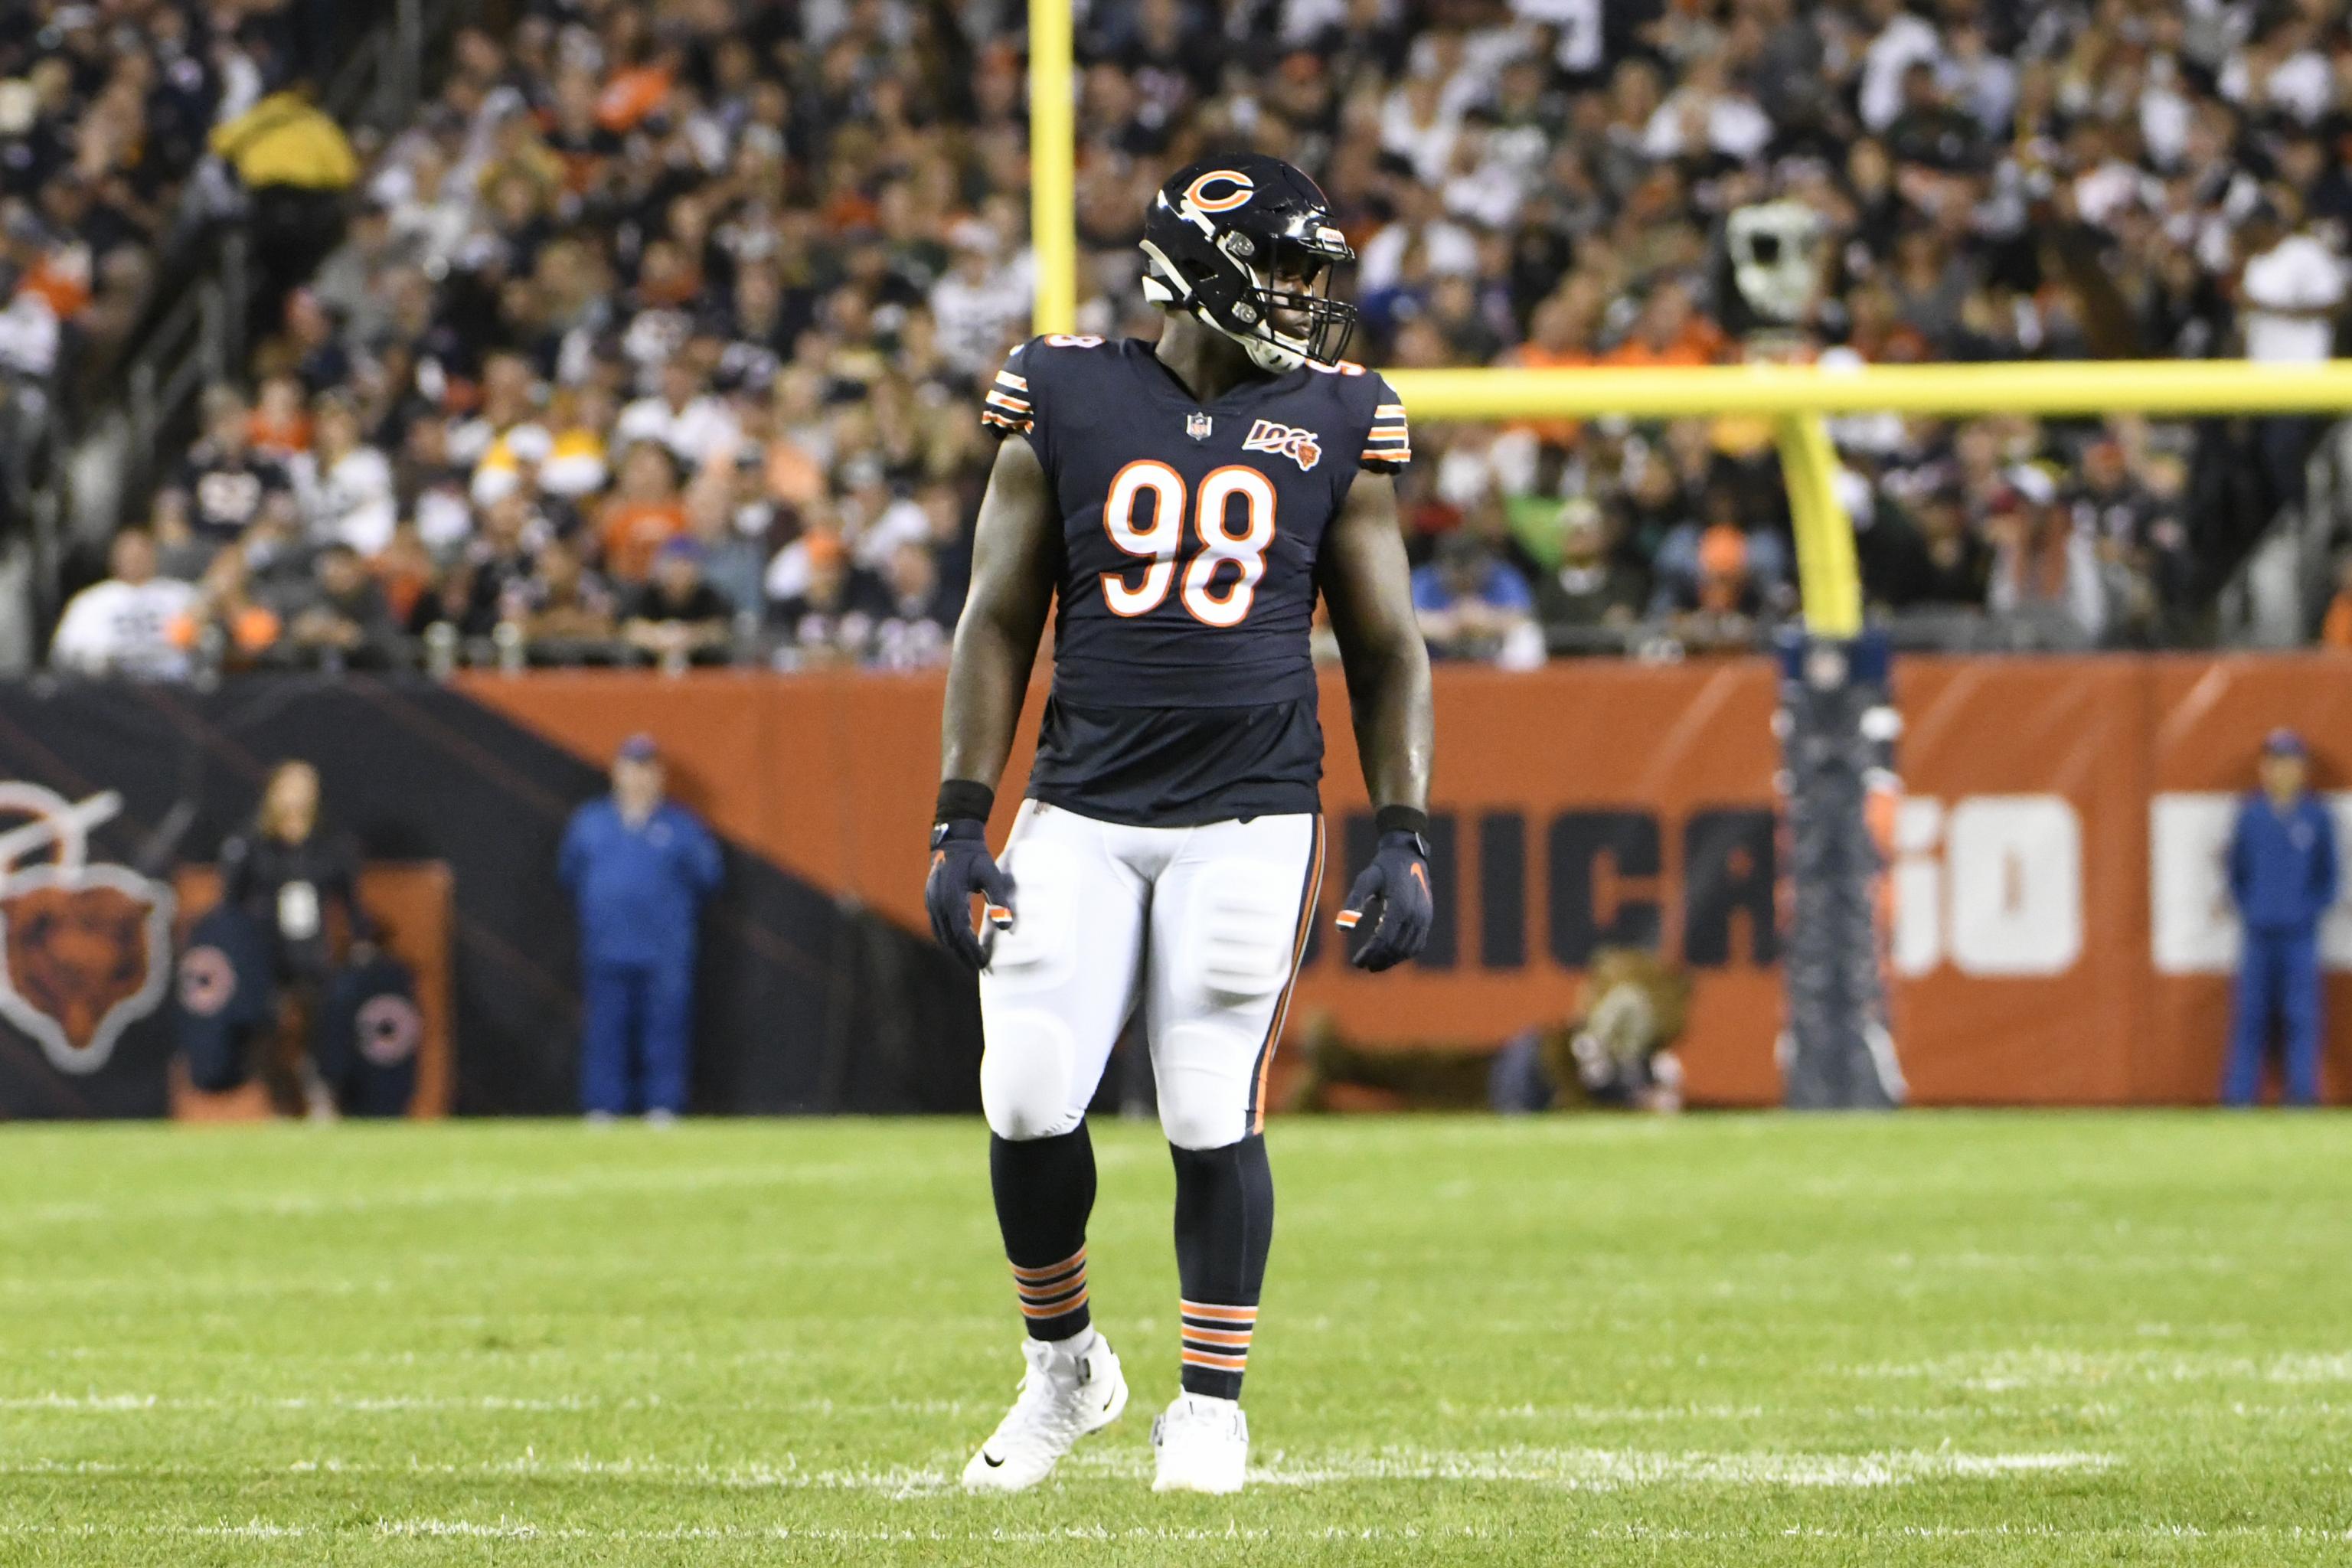 Bilal Nichols emerging as a playmaker on Bears' line - Chicago Sun-Times